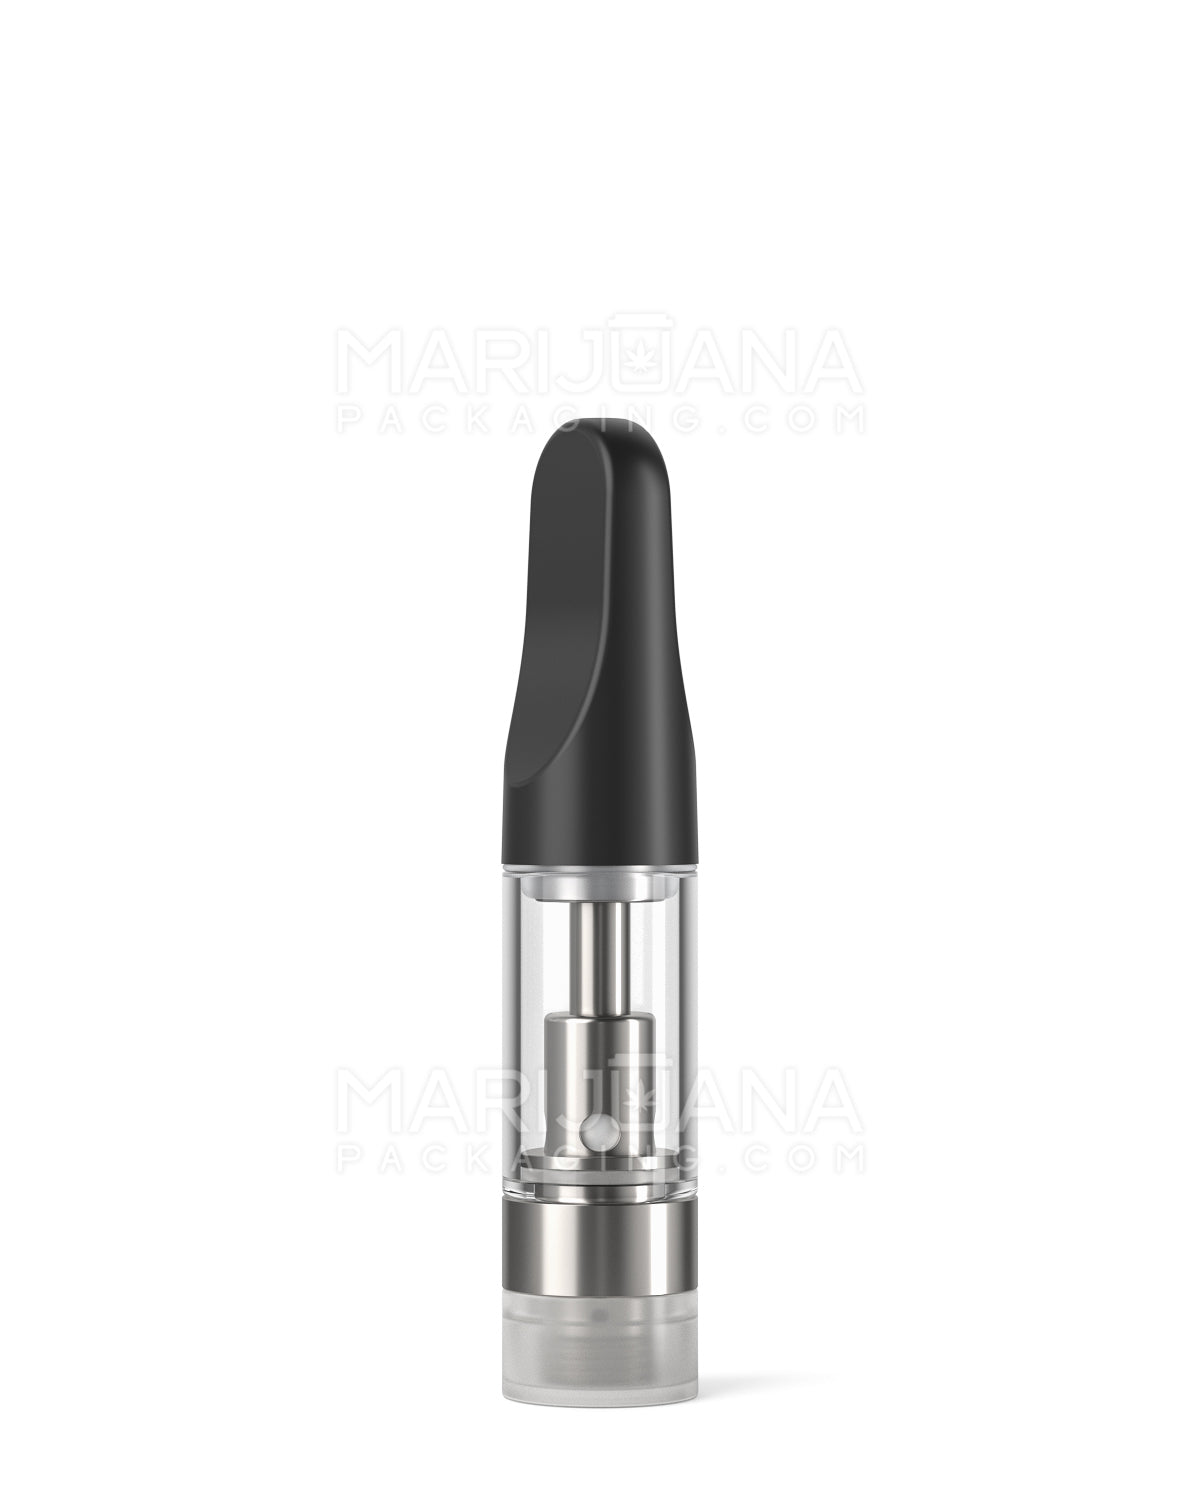 CCELL | Liquid6 Reactor Glass Vape Cartridge with Black Plastic Mouthpiece | 0.5mL - Screw On - 100 Count - 3